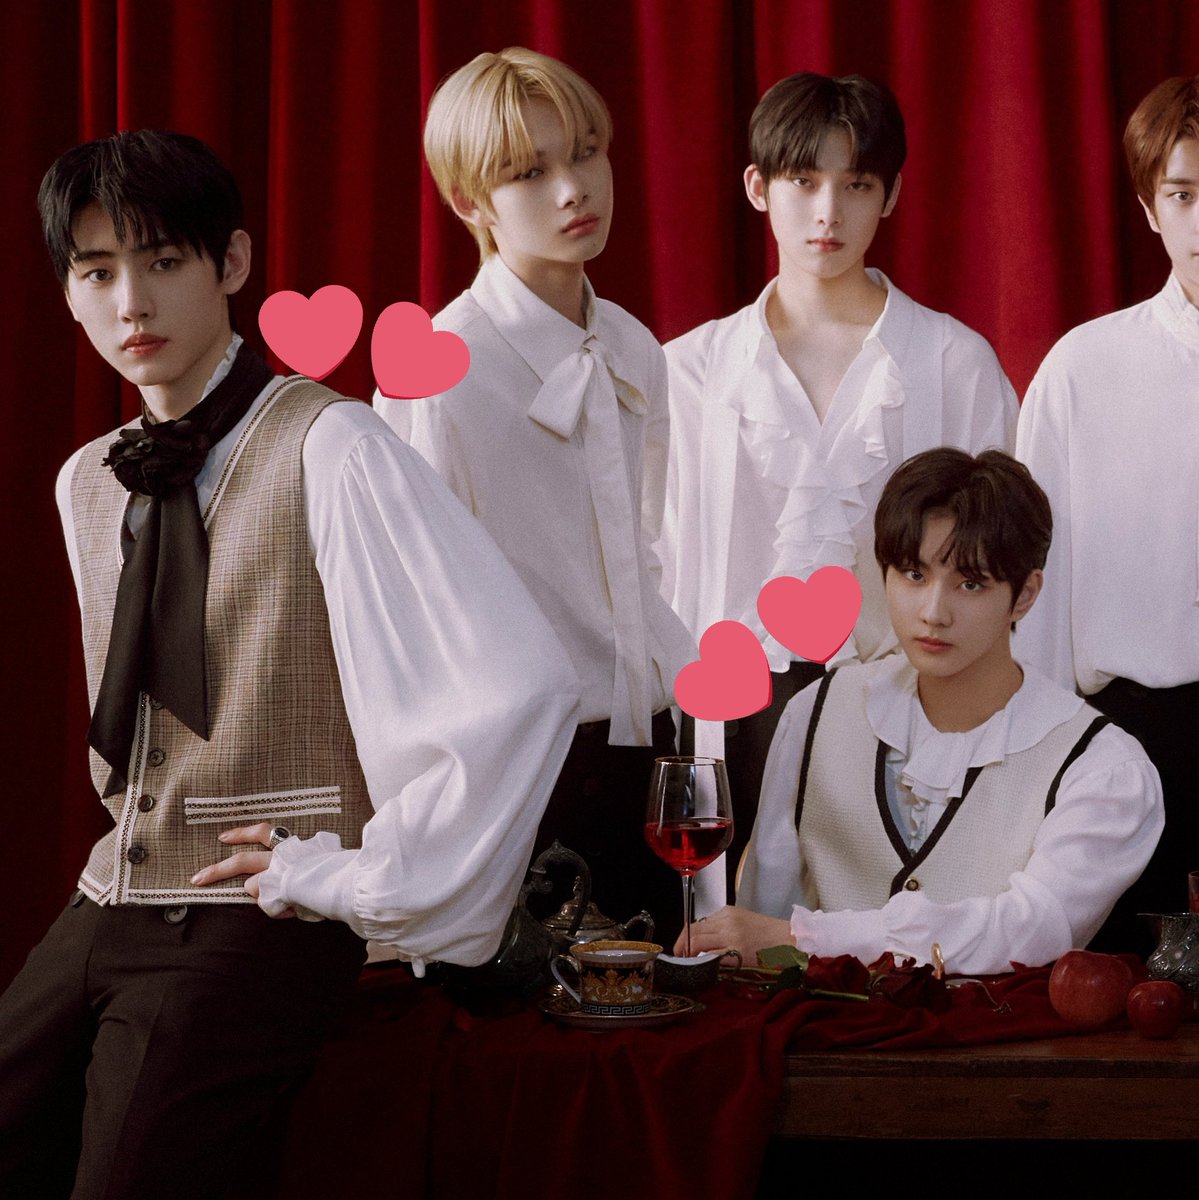 who's the owner of the throne?i think it's either sunghoon or jungwon, why? bcs look at their fits, sh and jw are wearing different clothes, i mean they have an extra thing (yk the brown and white thing) while the others don't have. From this picture we can also see++